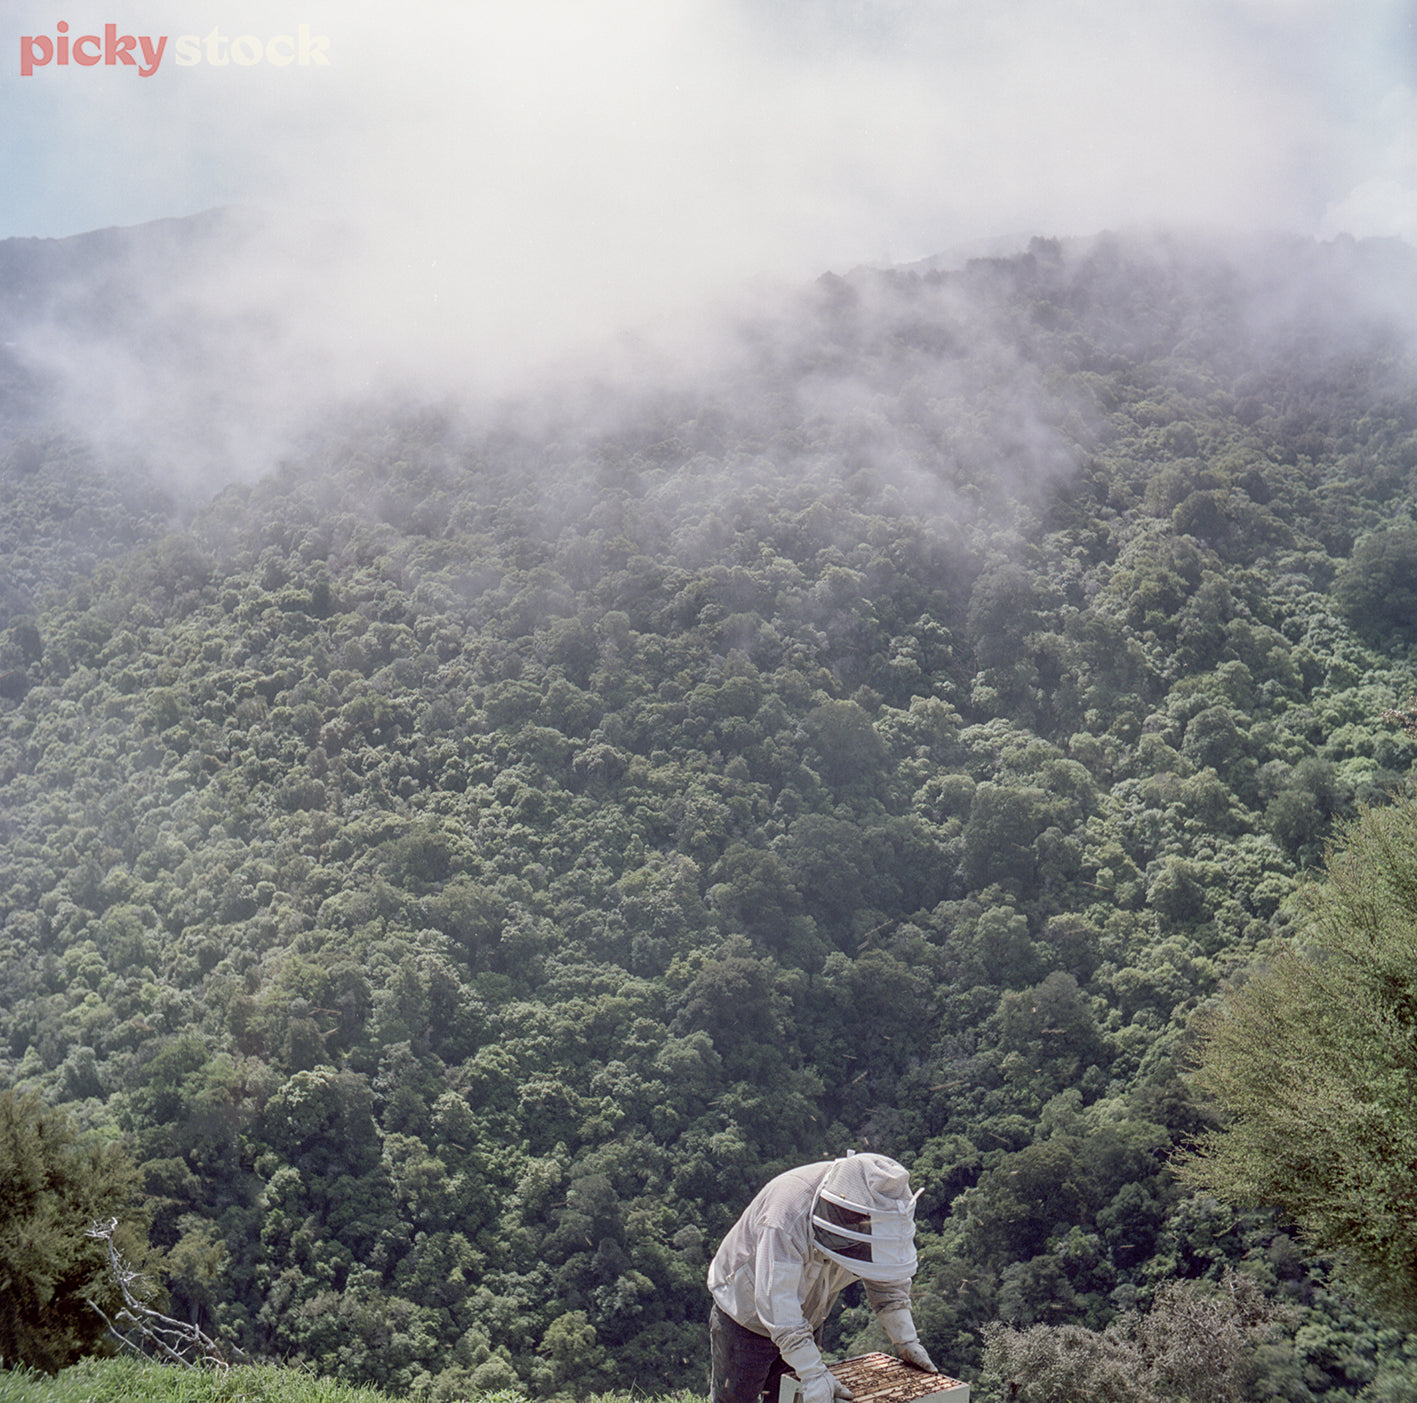 Single beekeeper in full protective gear checking hives against dramatic bush and hill face. Low cloud falling in valley in the background. 